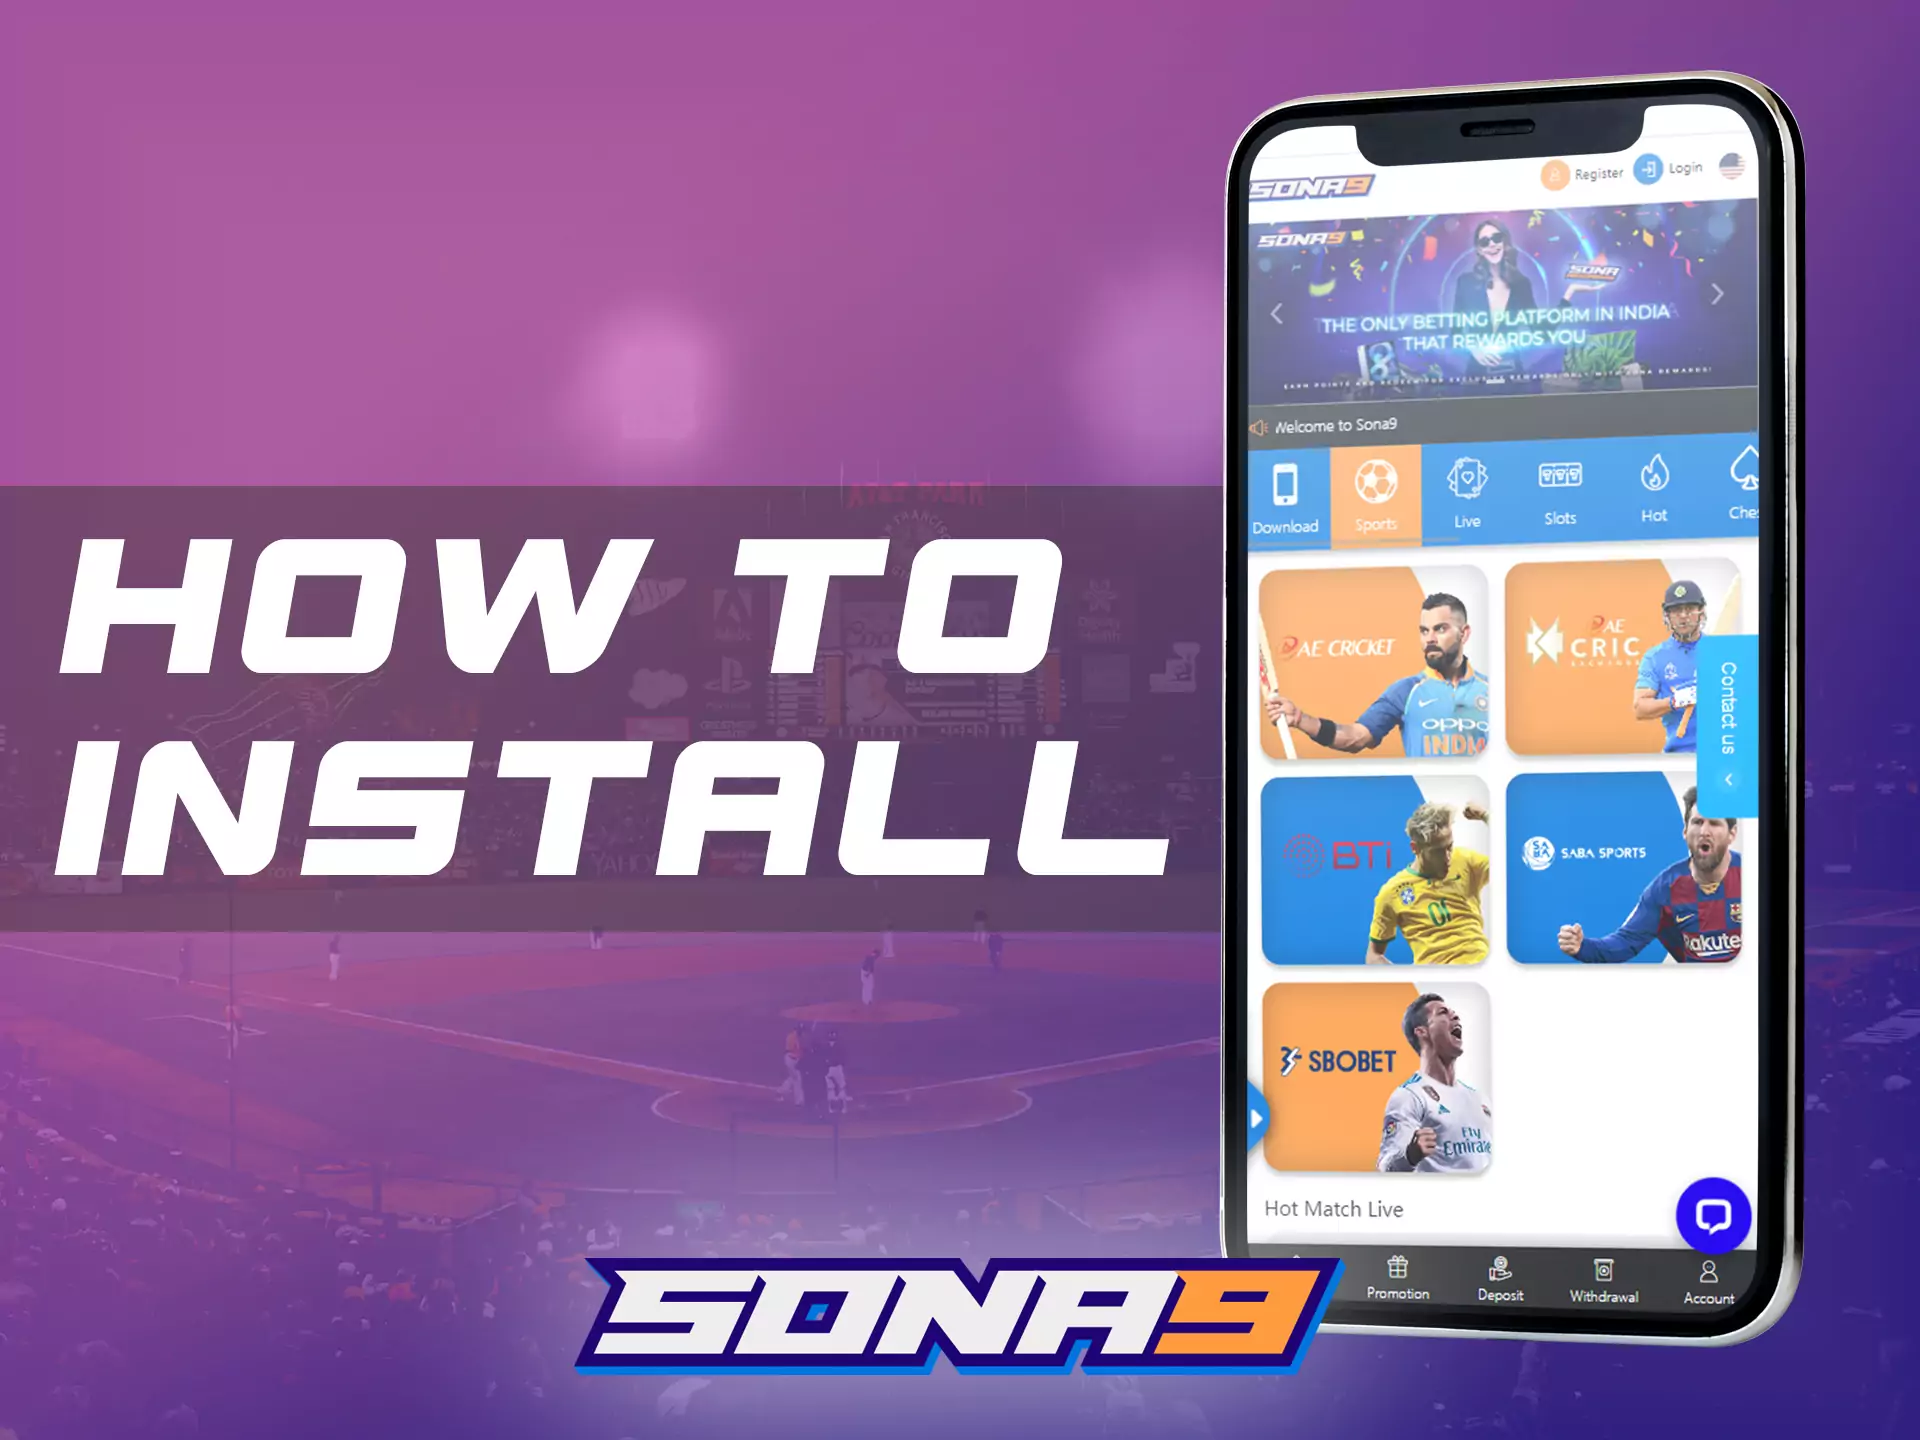 Run the file and install the application of Sona9 on your device.